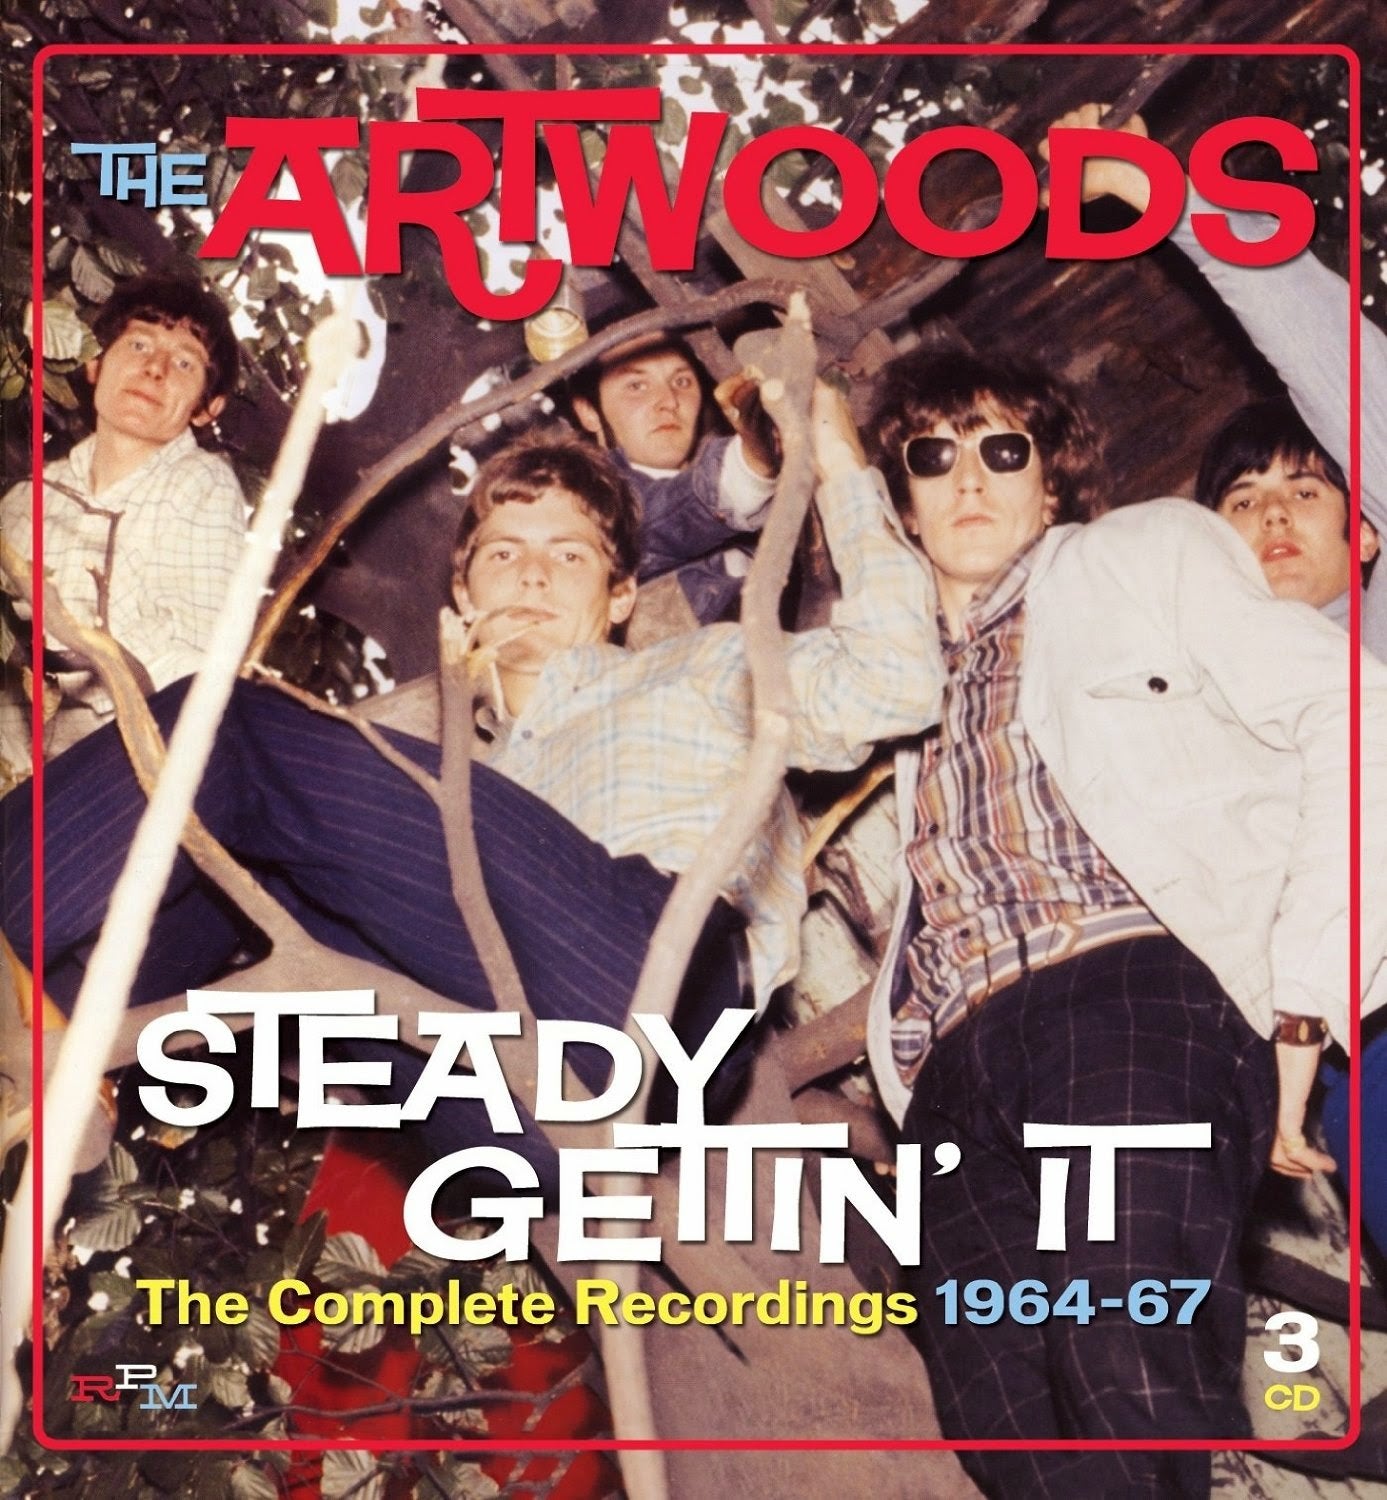 Steady Getting' It - The Complete Recordings 1964-67